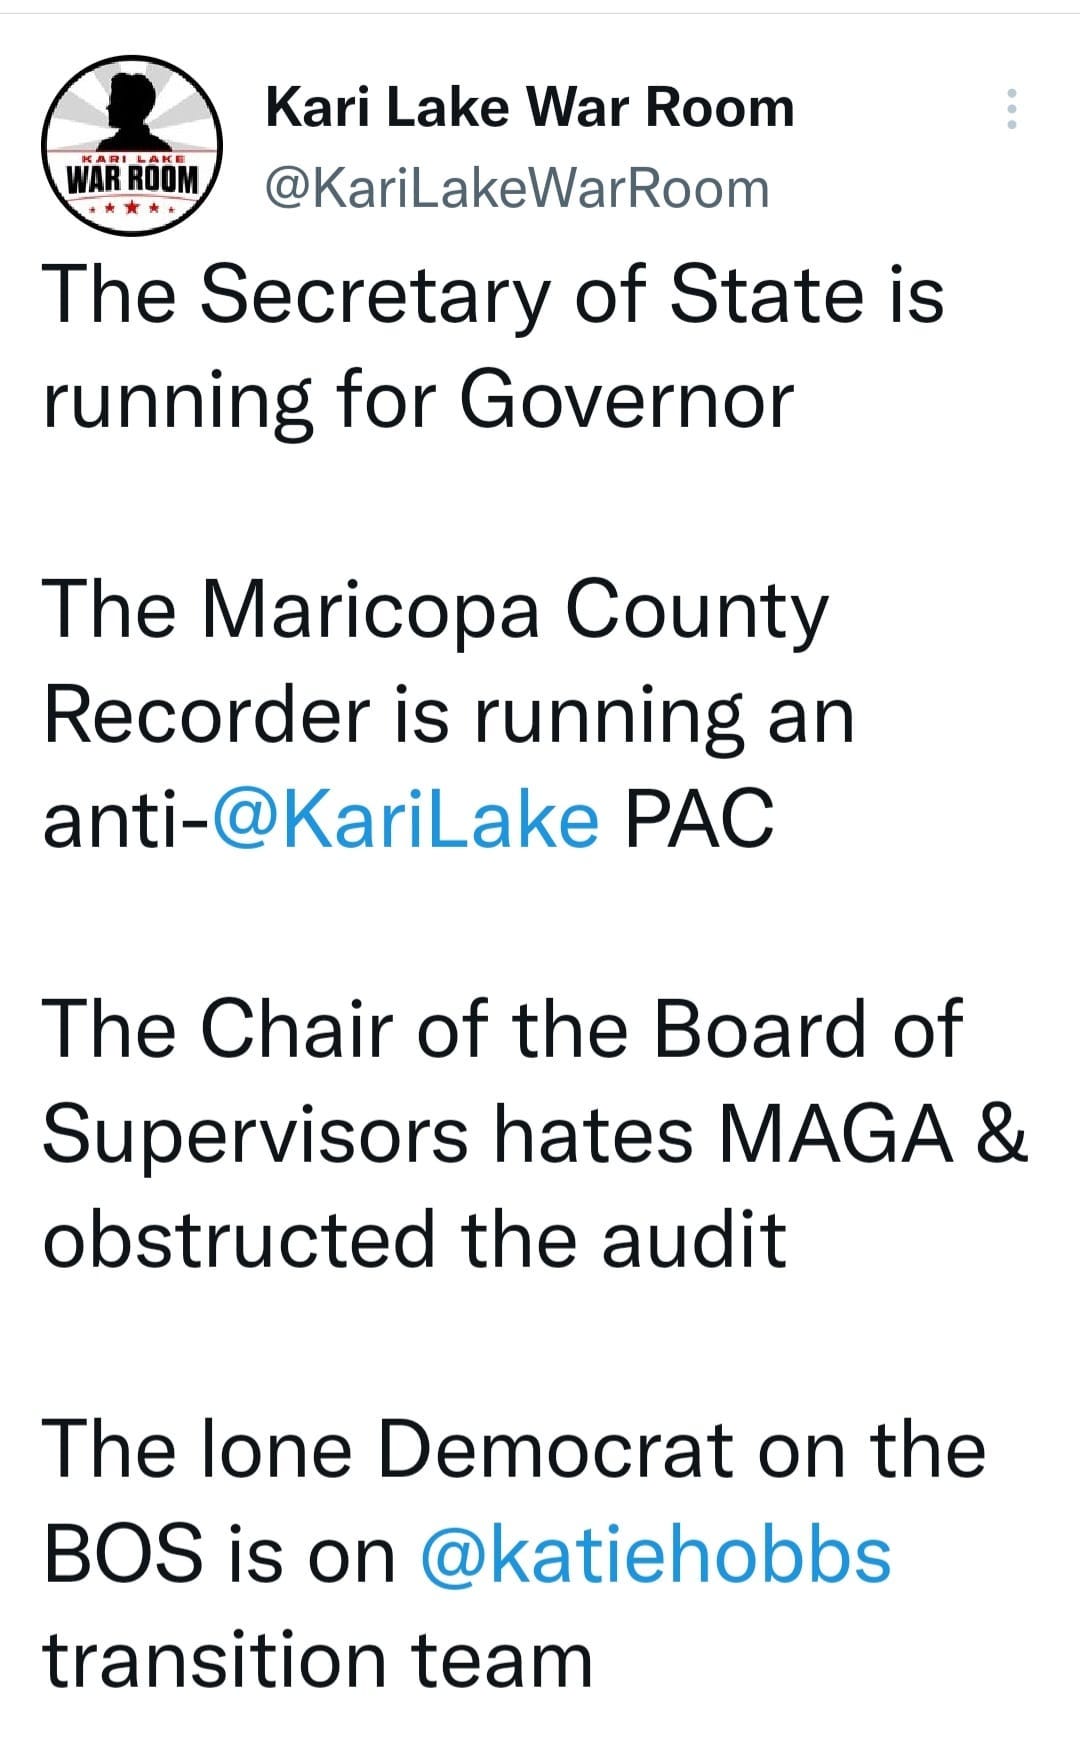 May be an image of text that says 'KABIAAO Kari Lake War Room @KariLakeWarRoom The Secretary of State is running for Governor The Maricopa County Recorder is running an anti-@KariLake PAC The Chair of the Board of Supervisors hates MAGA & obstructed the audit The lone Democrat on the BOS is on @katiehobbs transition team'